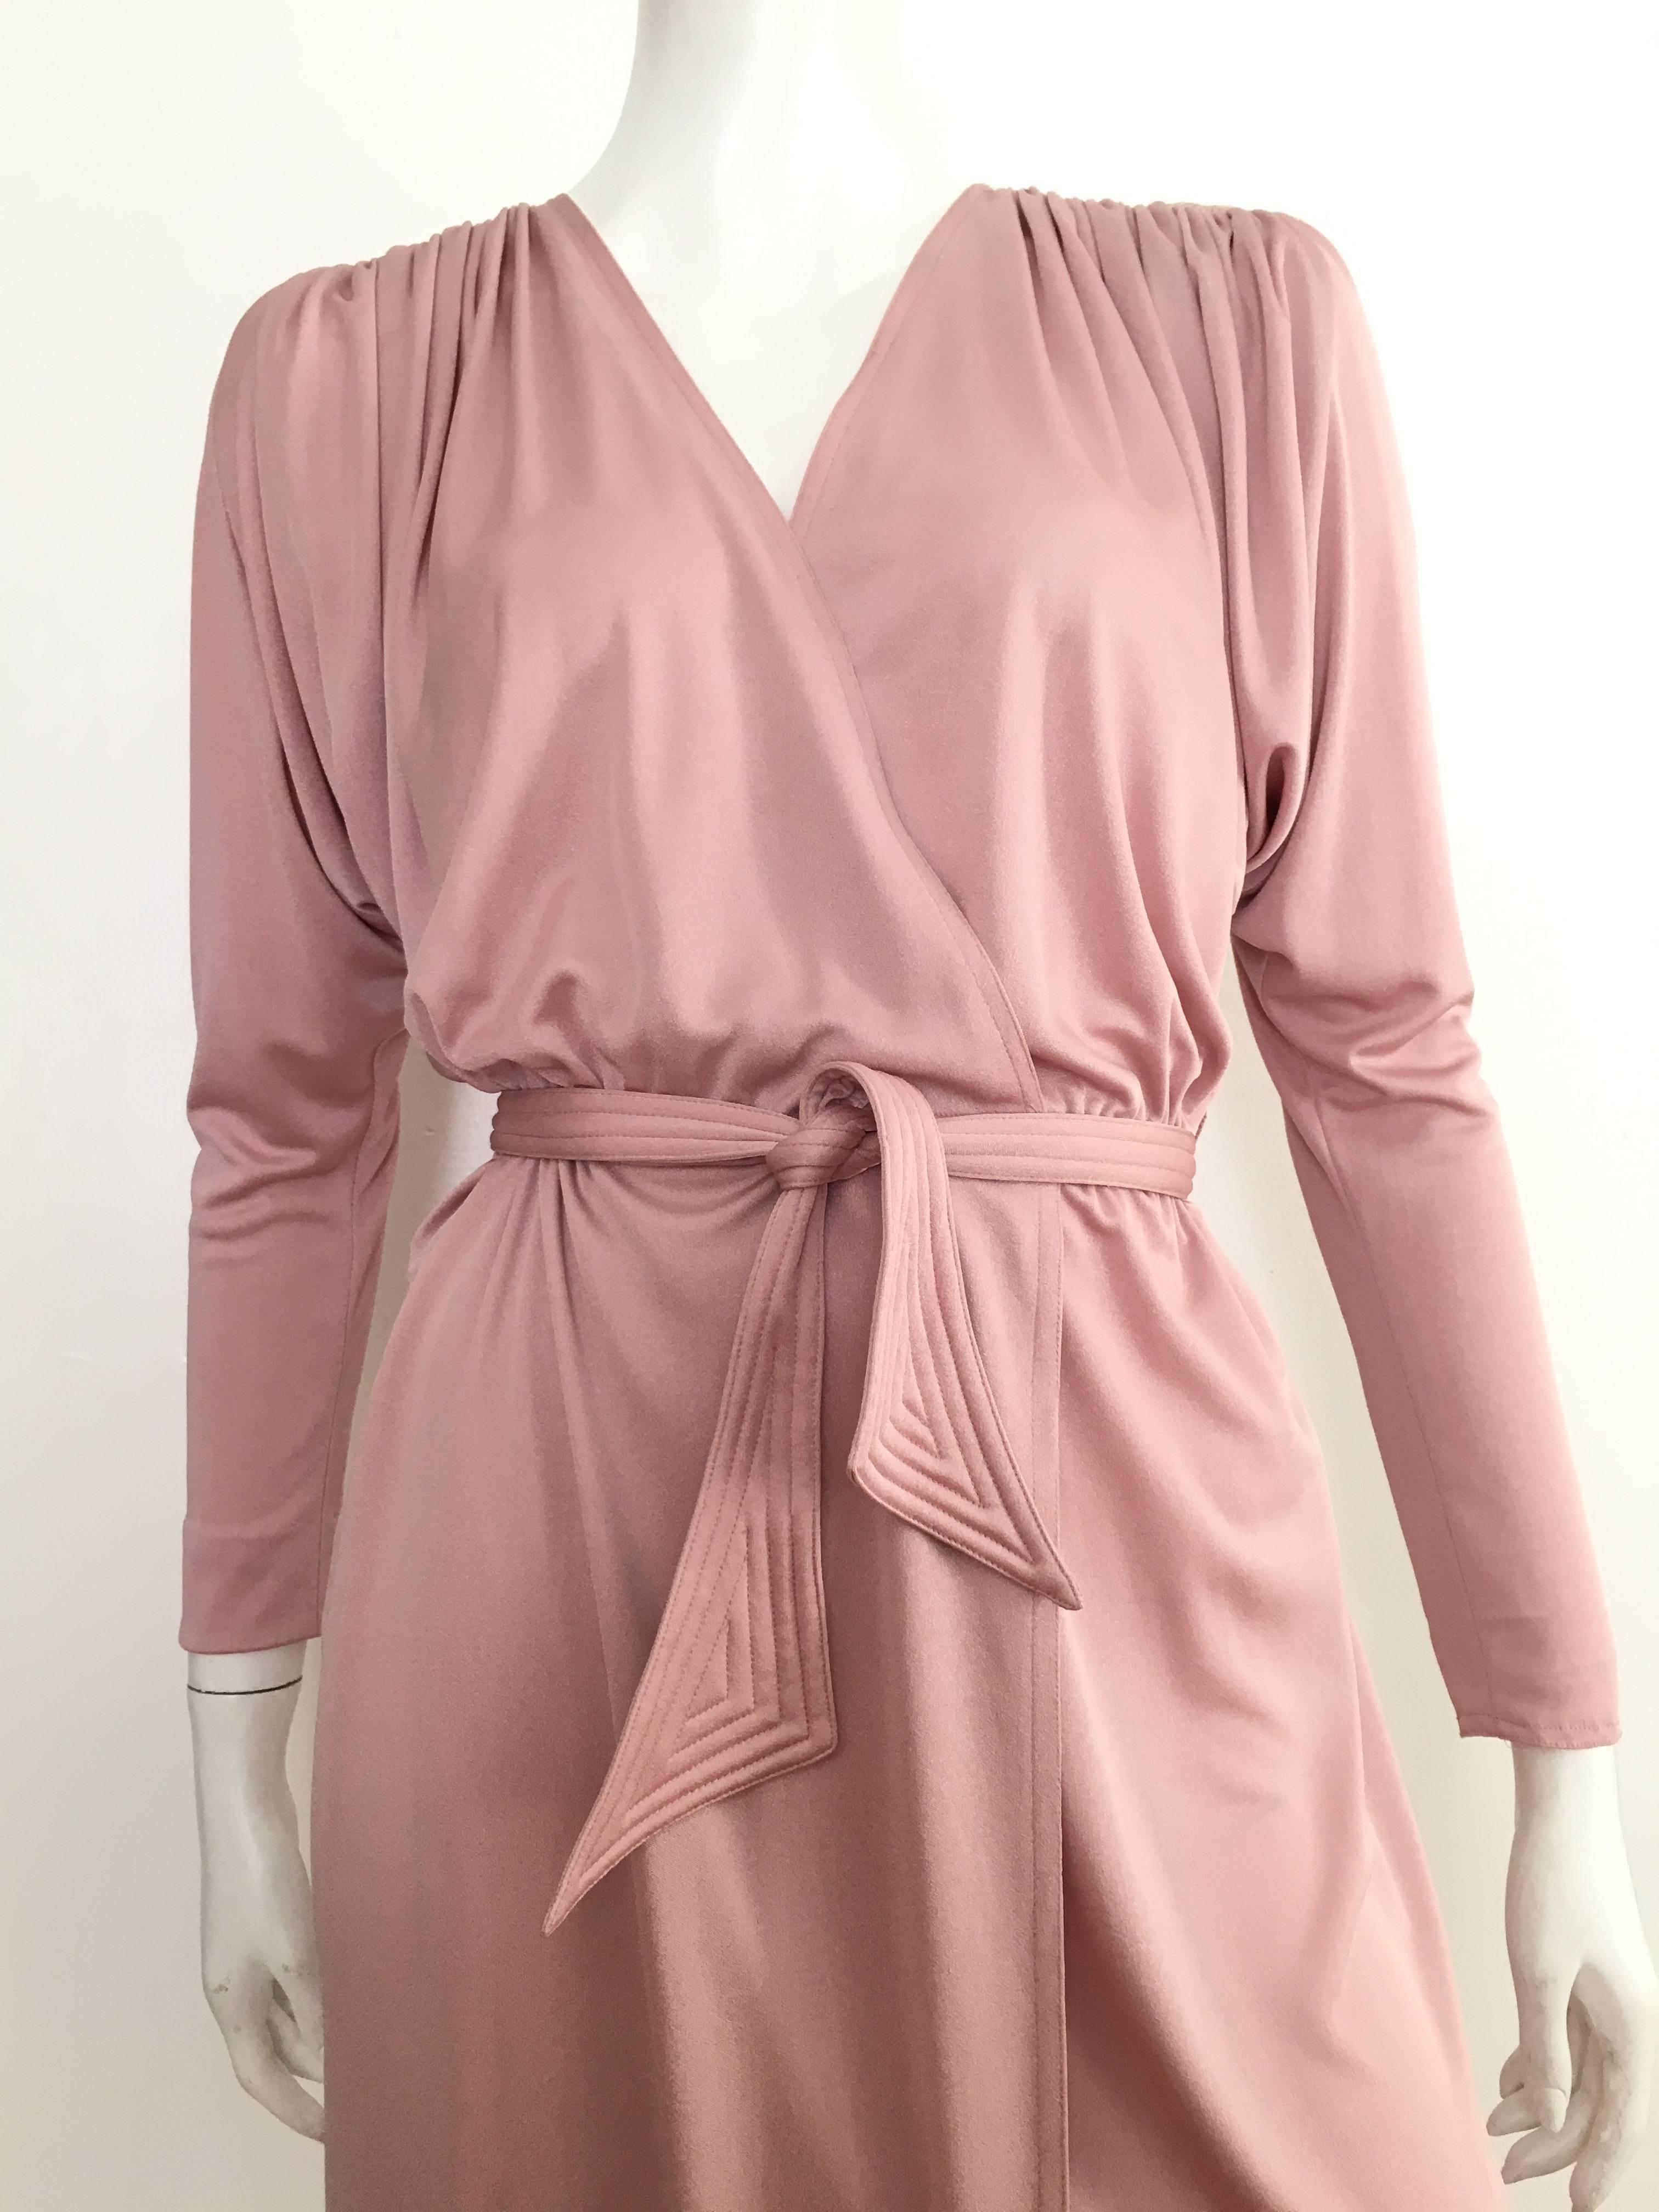 Pierre Cardin early 1980s faux wrap pink champagne dolman sleeves with belt with pockets dress is a size 8.  Ladies please use your measuring tape so you can properly measure your bust, waist & hips so you know for certain this vintage piece will